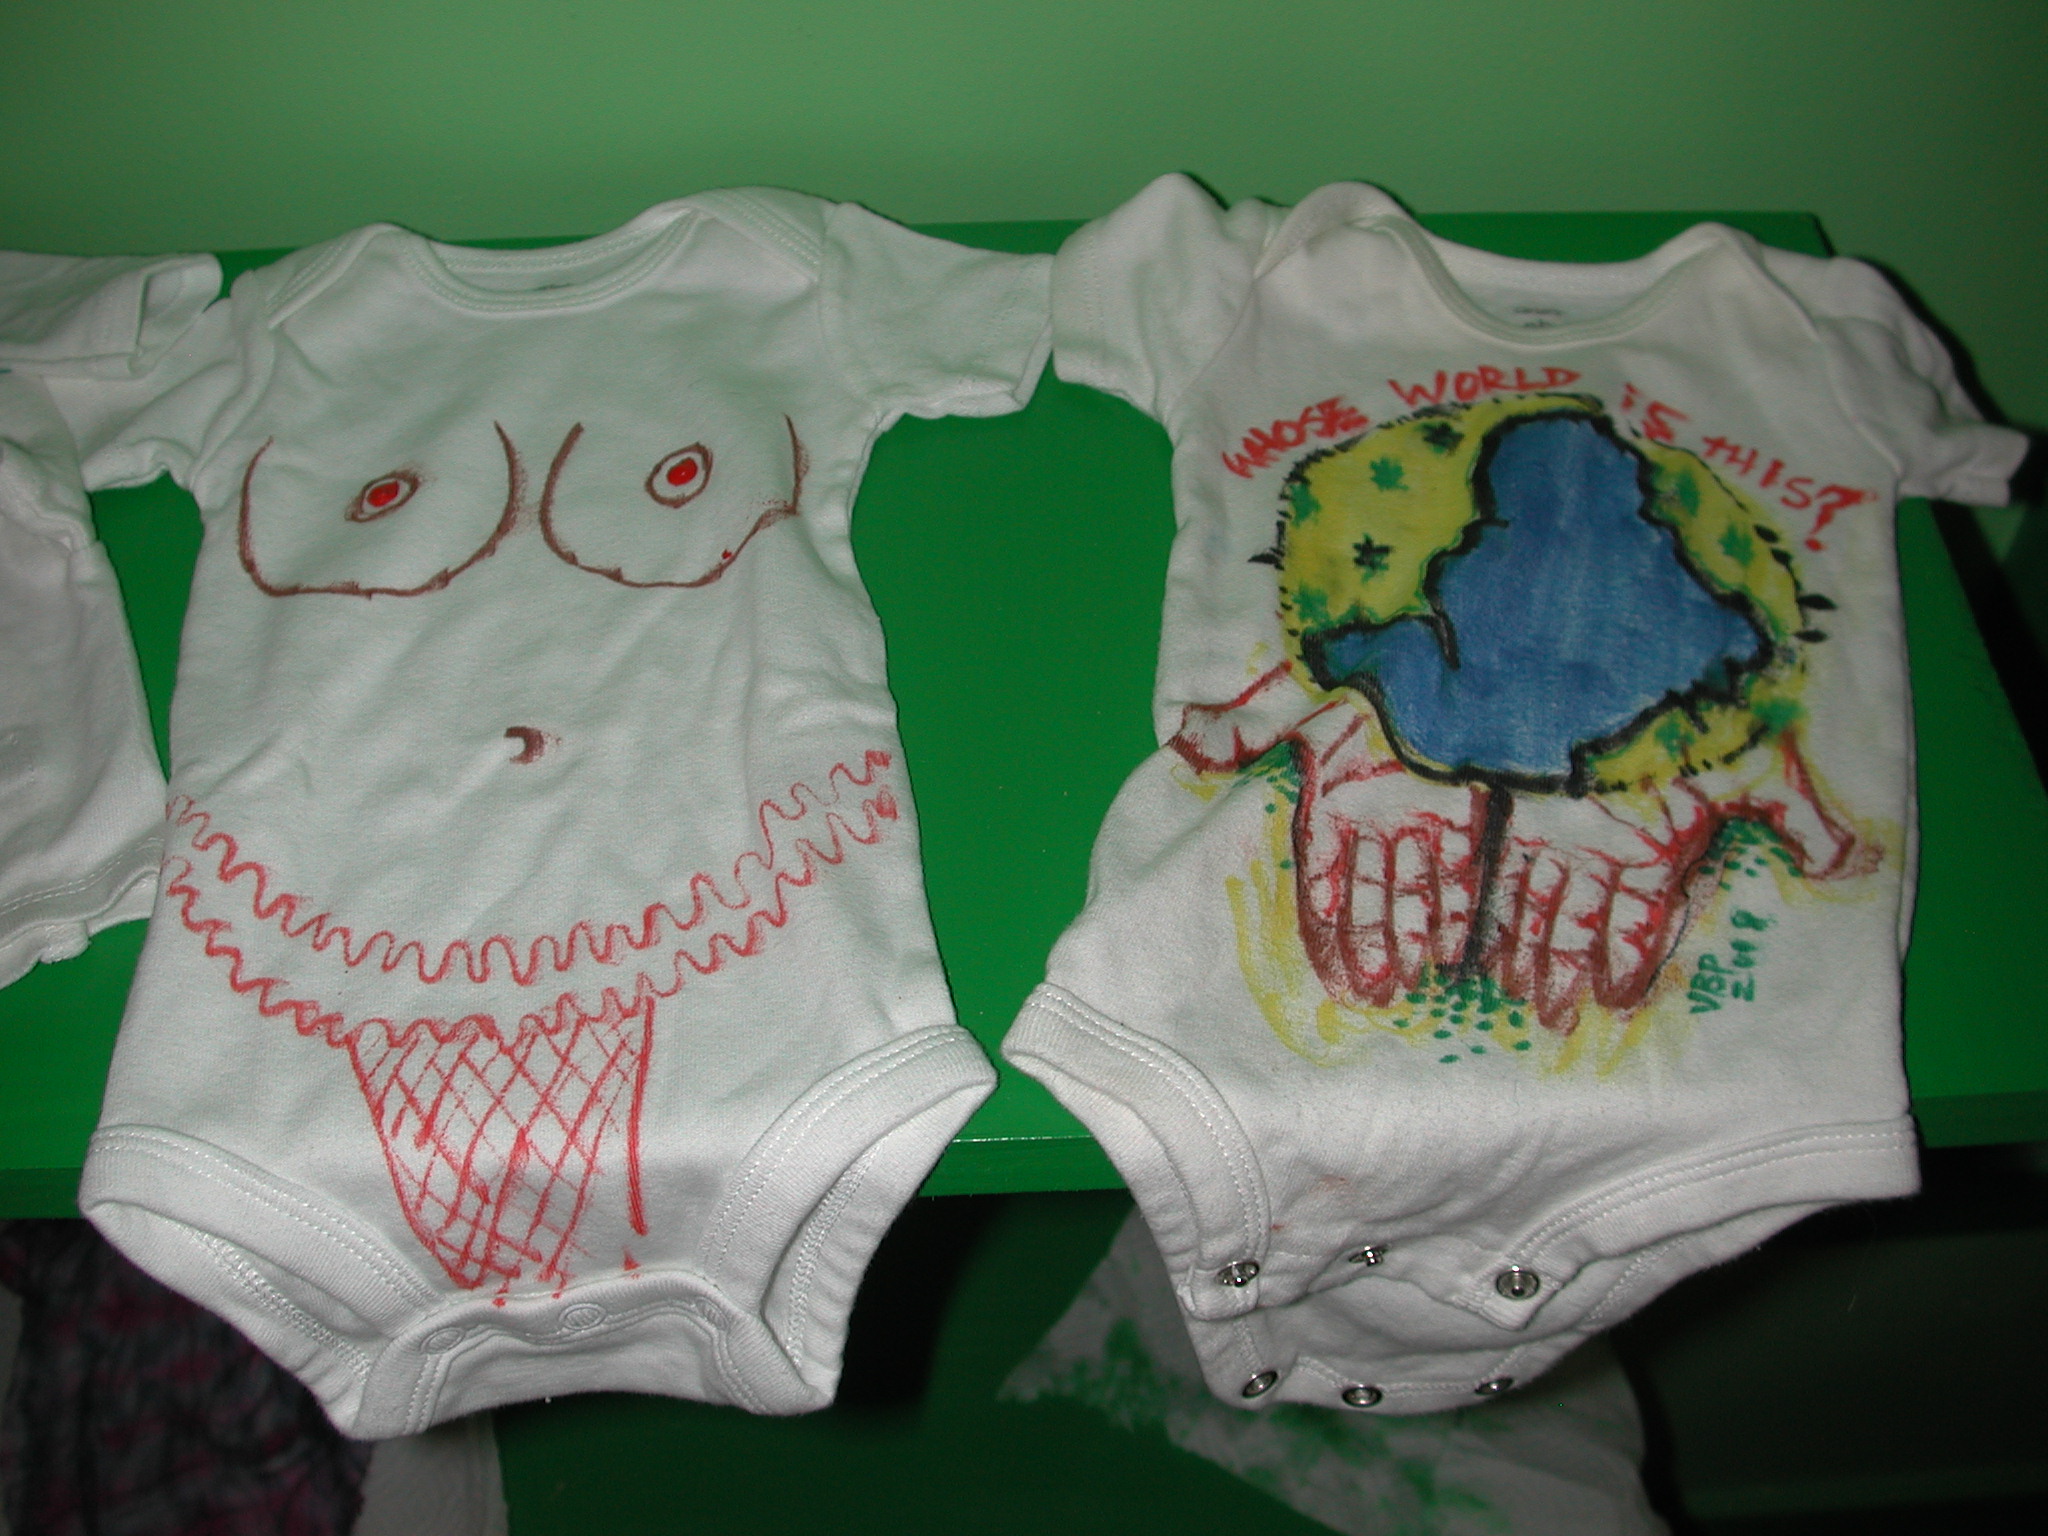 two little ones shirts and one has a baby's head painted on it